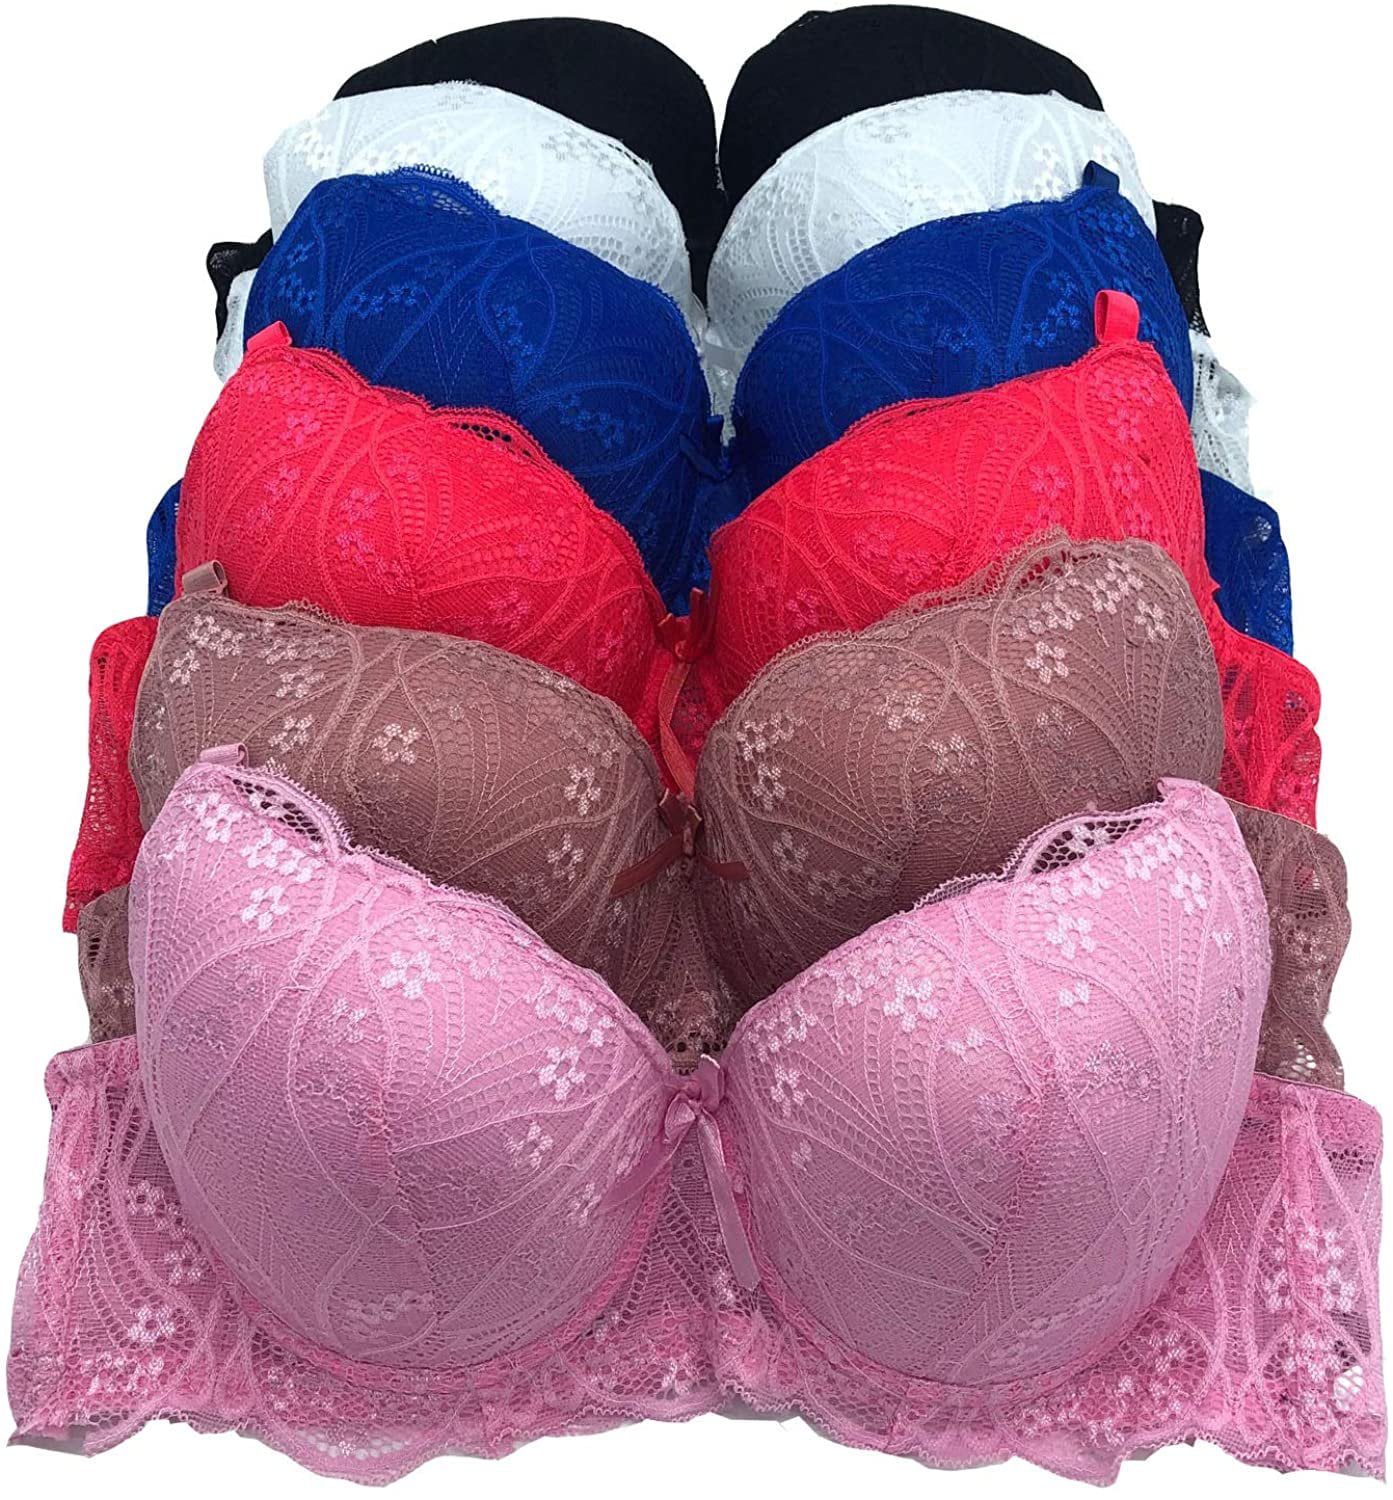 6 Pieces Full Cup Lace Gentle Push Up Pushup B/C Bra (34B